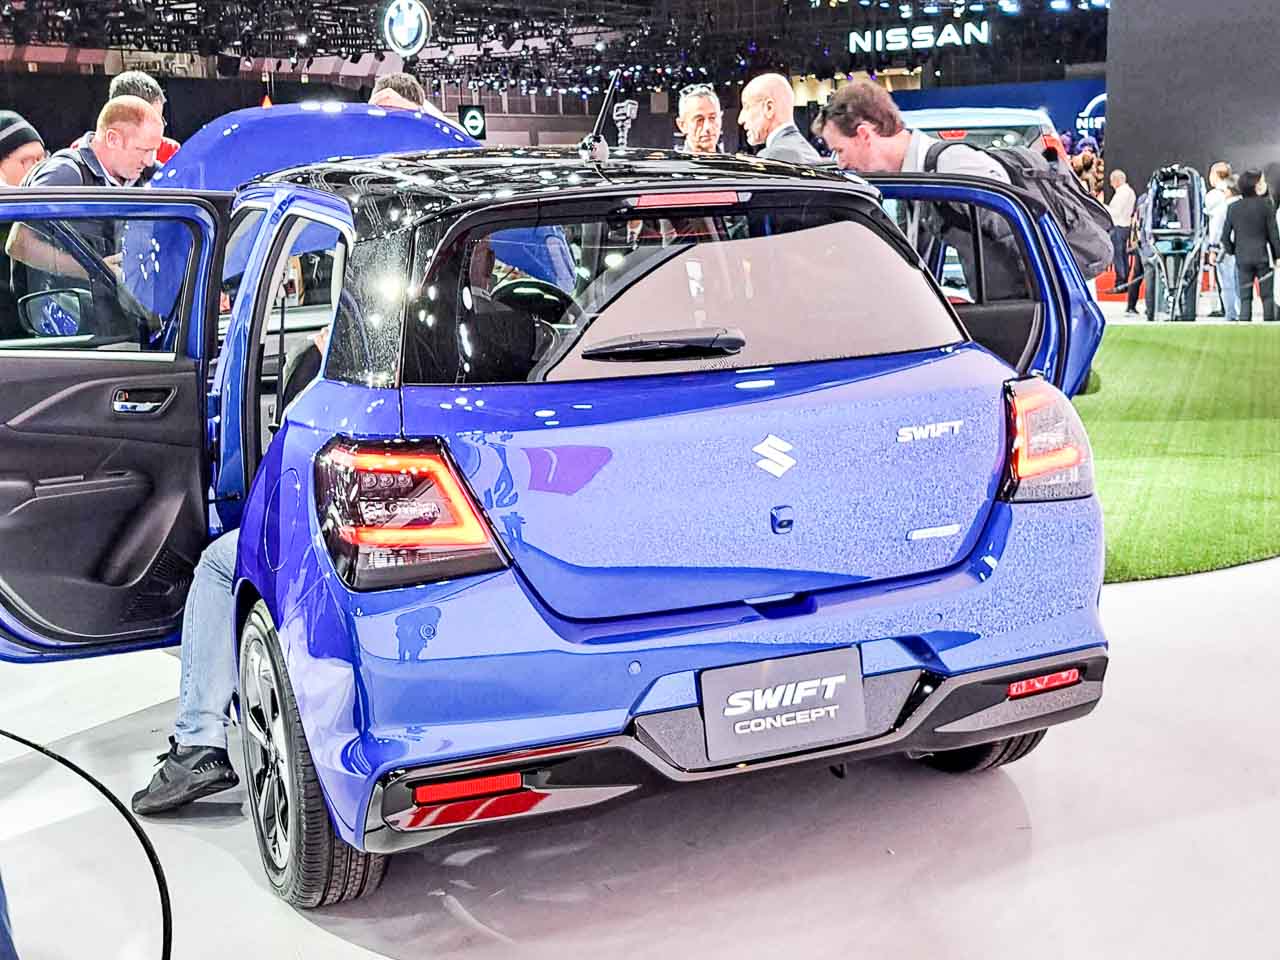 2024 Suzuki Swift Revealed In Japan, Looking Identical To The Concept